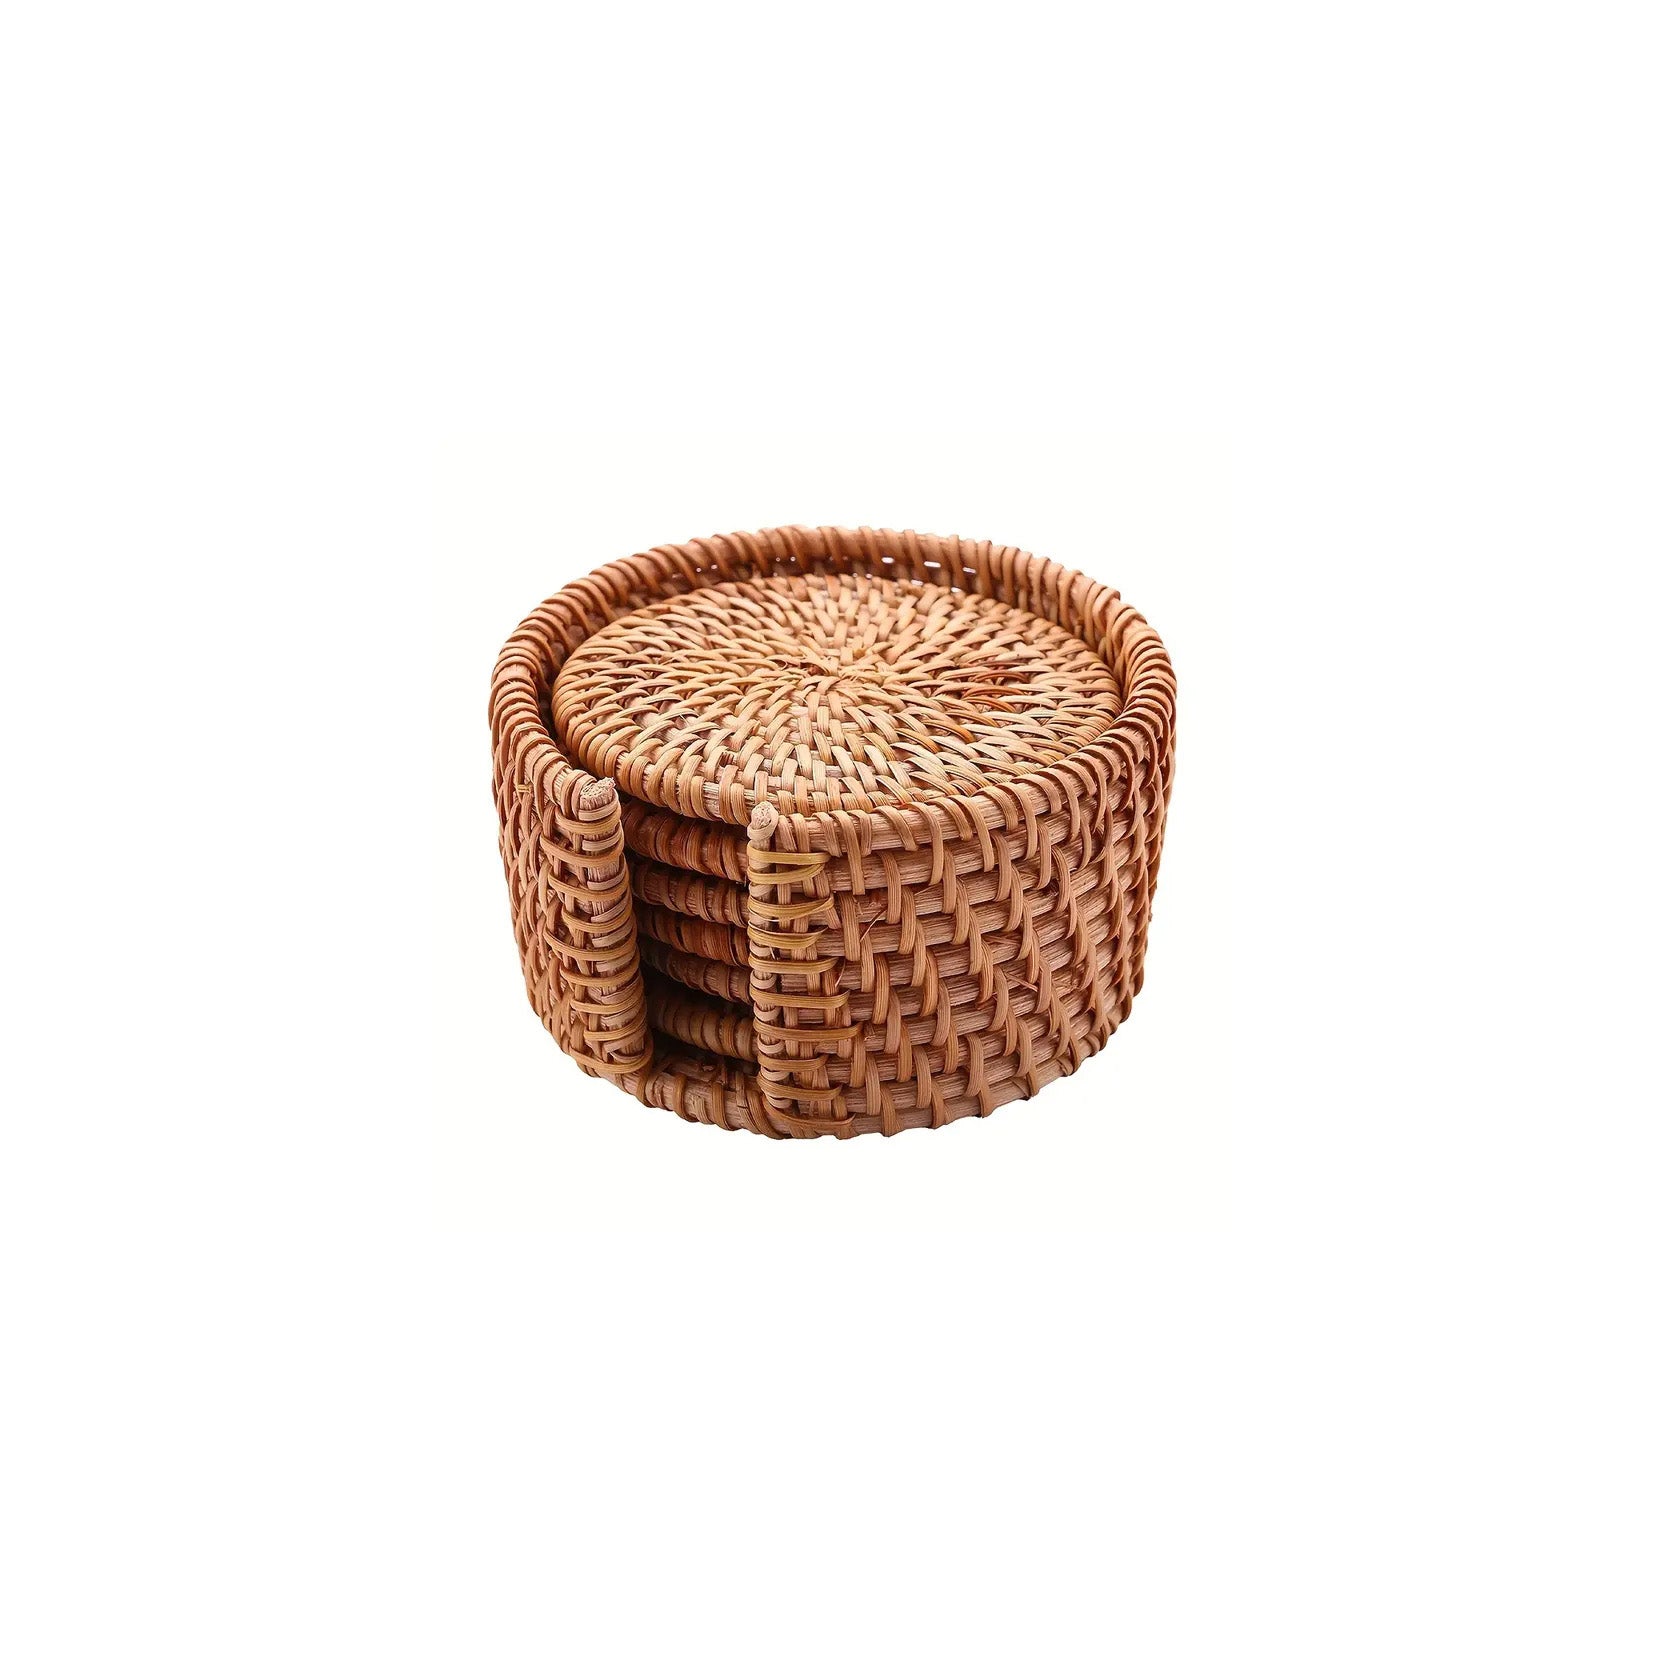 
  
  Natural Rattan Coaster Set with Holder - 6 Piece
  
